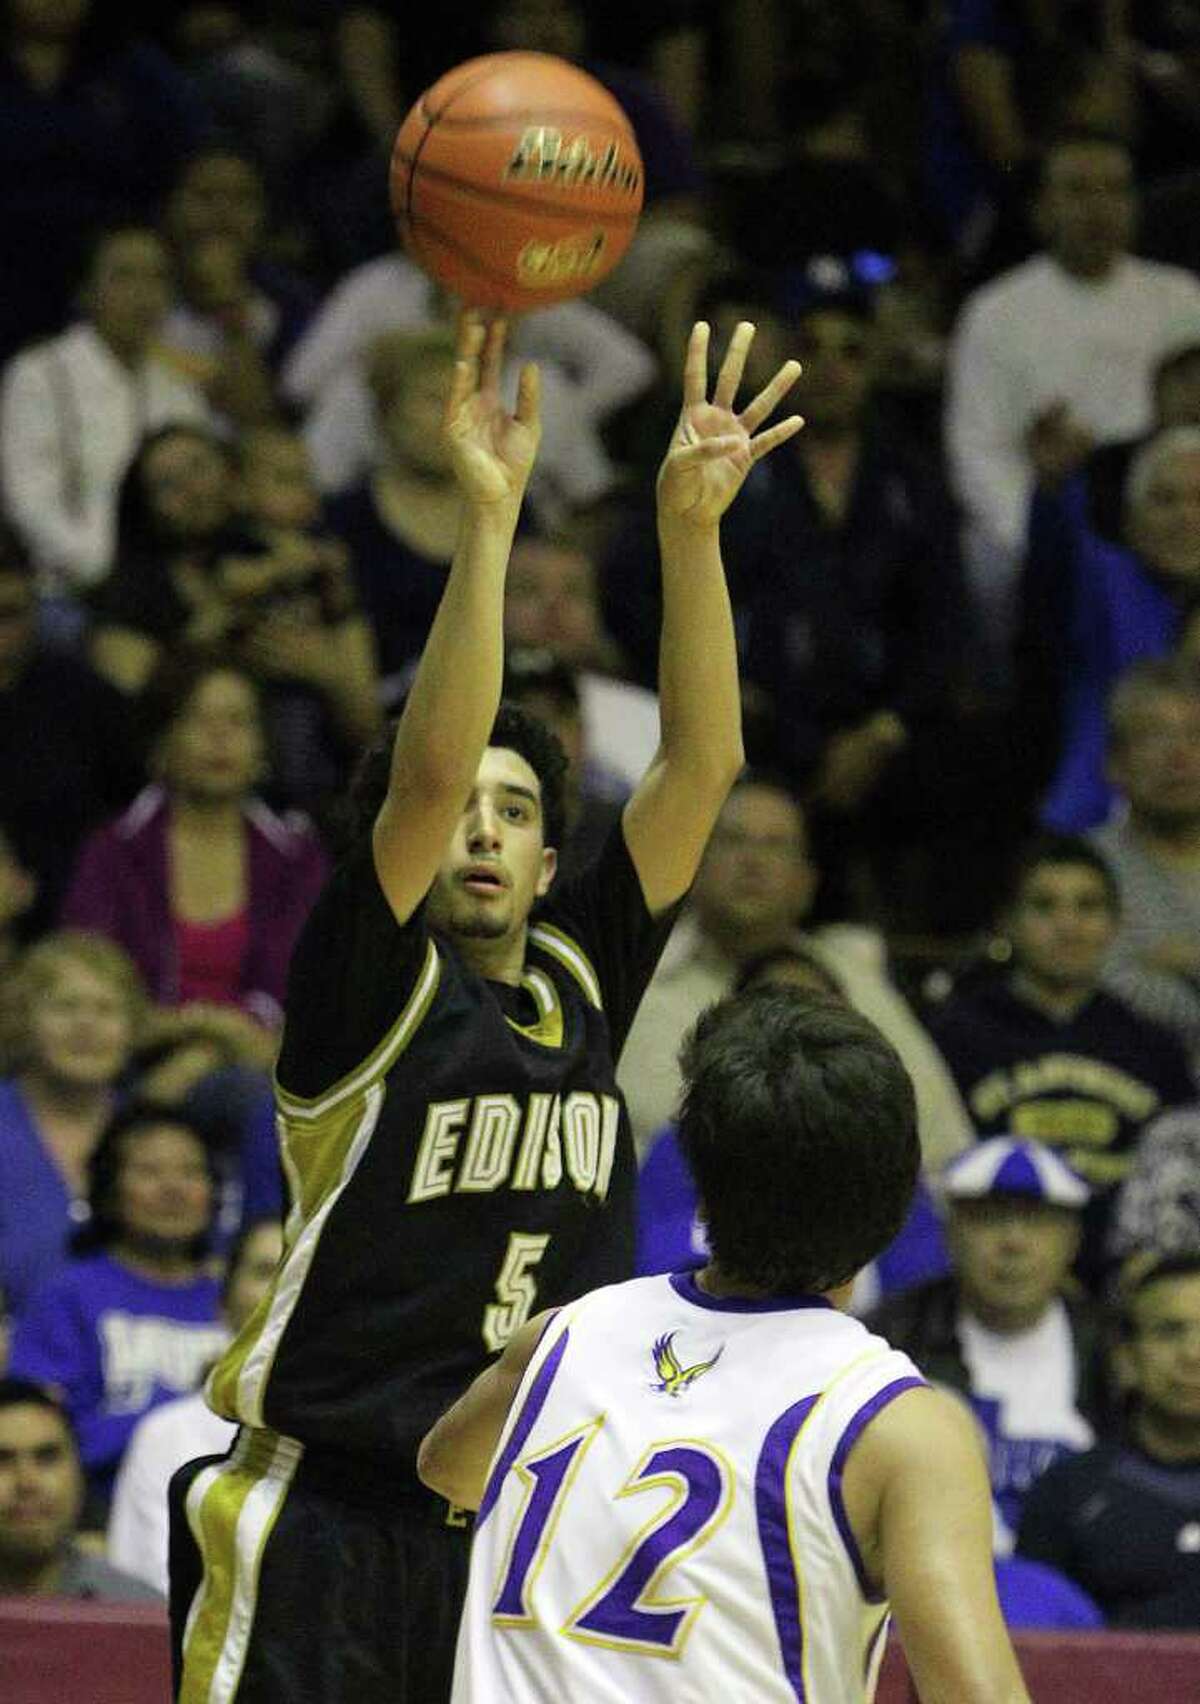 Edison's Arty Vela (05) hoists a three-pointer over Brackenridge's Anthony Garza (12) in the third round of District 29-4A basketball at the Alamo Convocation Center on Tuesday, Feb. 28, 2012. Edison defeated Brackenridge, 64-53.